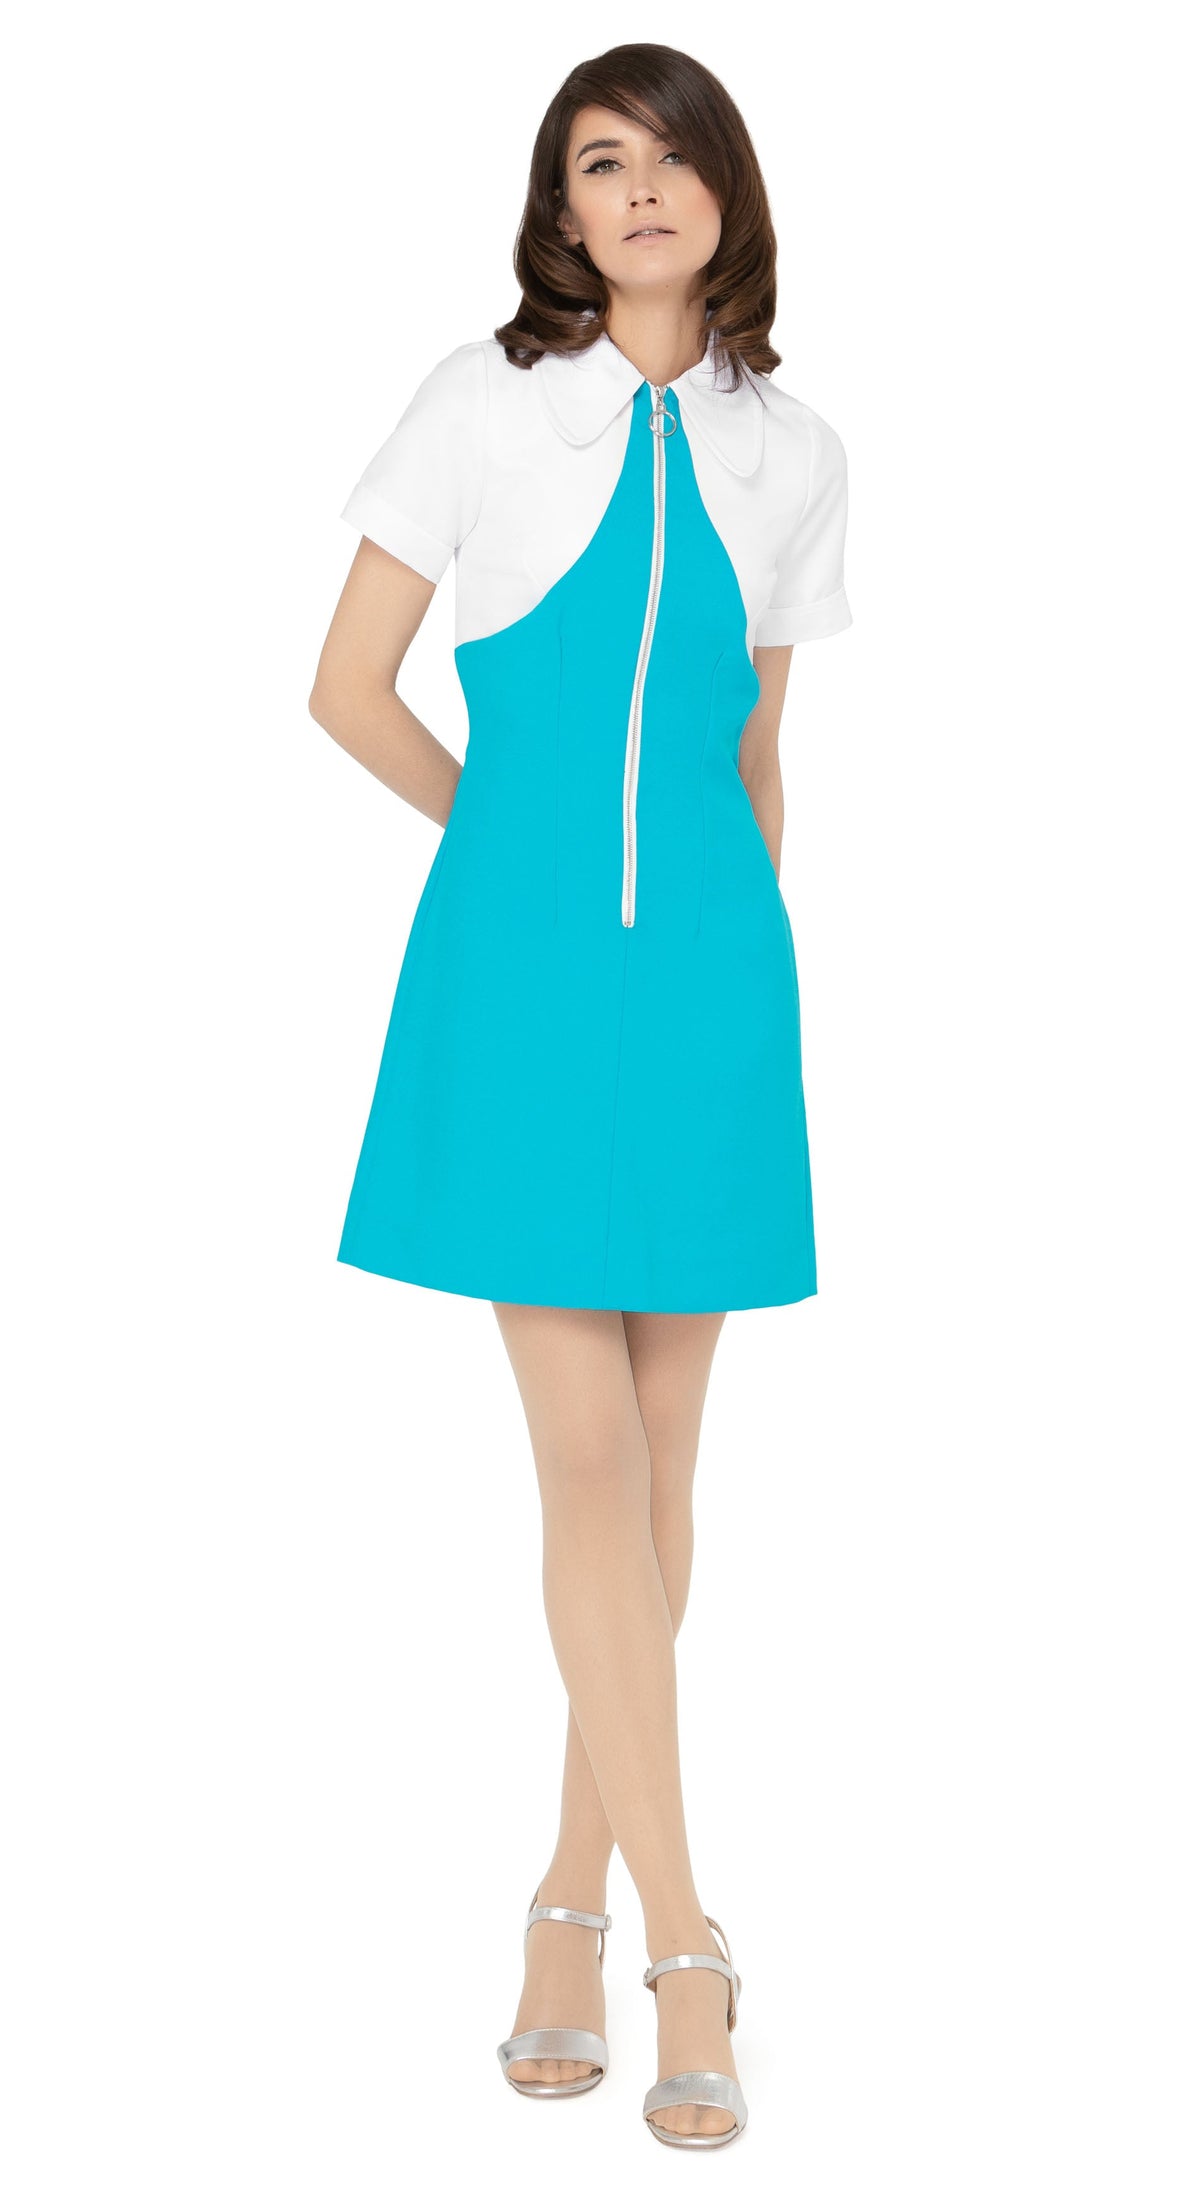 Vintage sport inspired dress, Casual, cool and immediately spring. This fitted, slightly A-line dress features a classic oversized 70s style collar and imaginative contrasting paneling across the skirting, torso, and neckline, giving it a modern twist on European sports styles of the sixties and seventies. The retro looped zipper front closure and short sleeves add to its vintage charm.